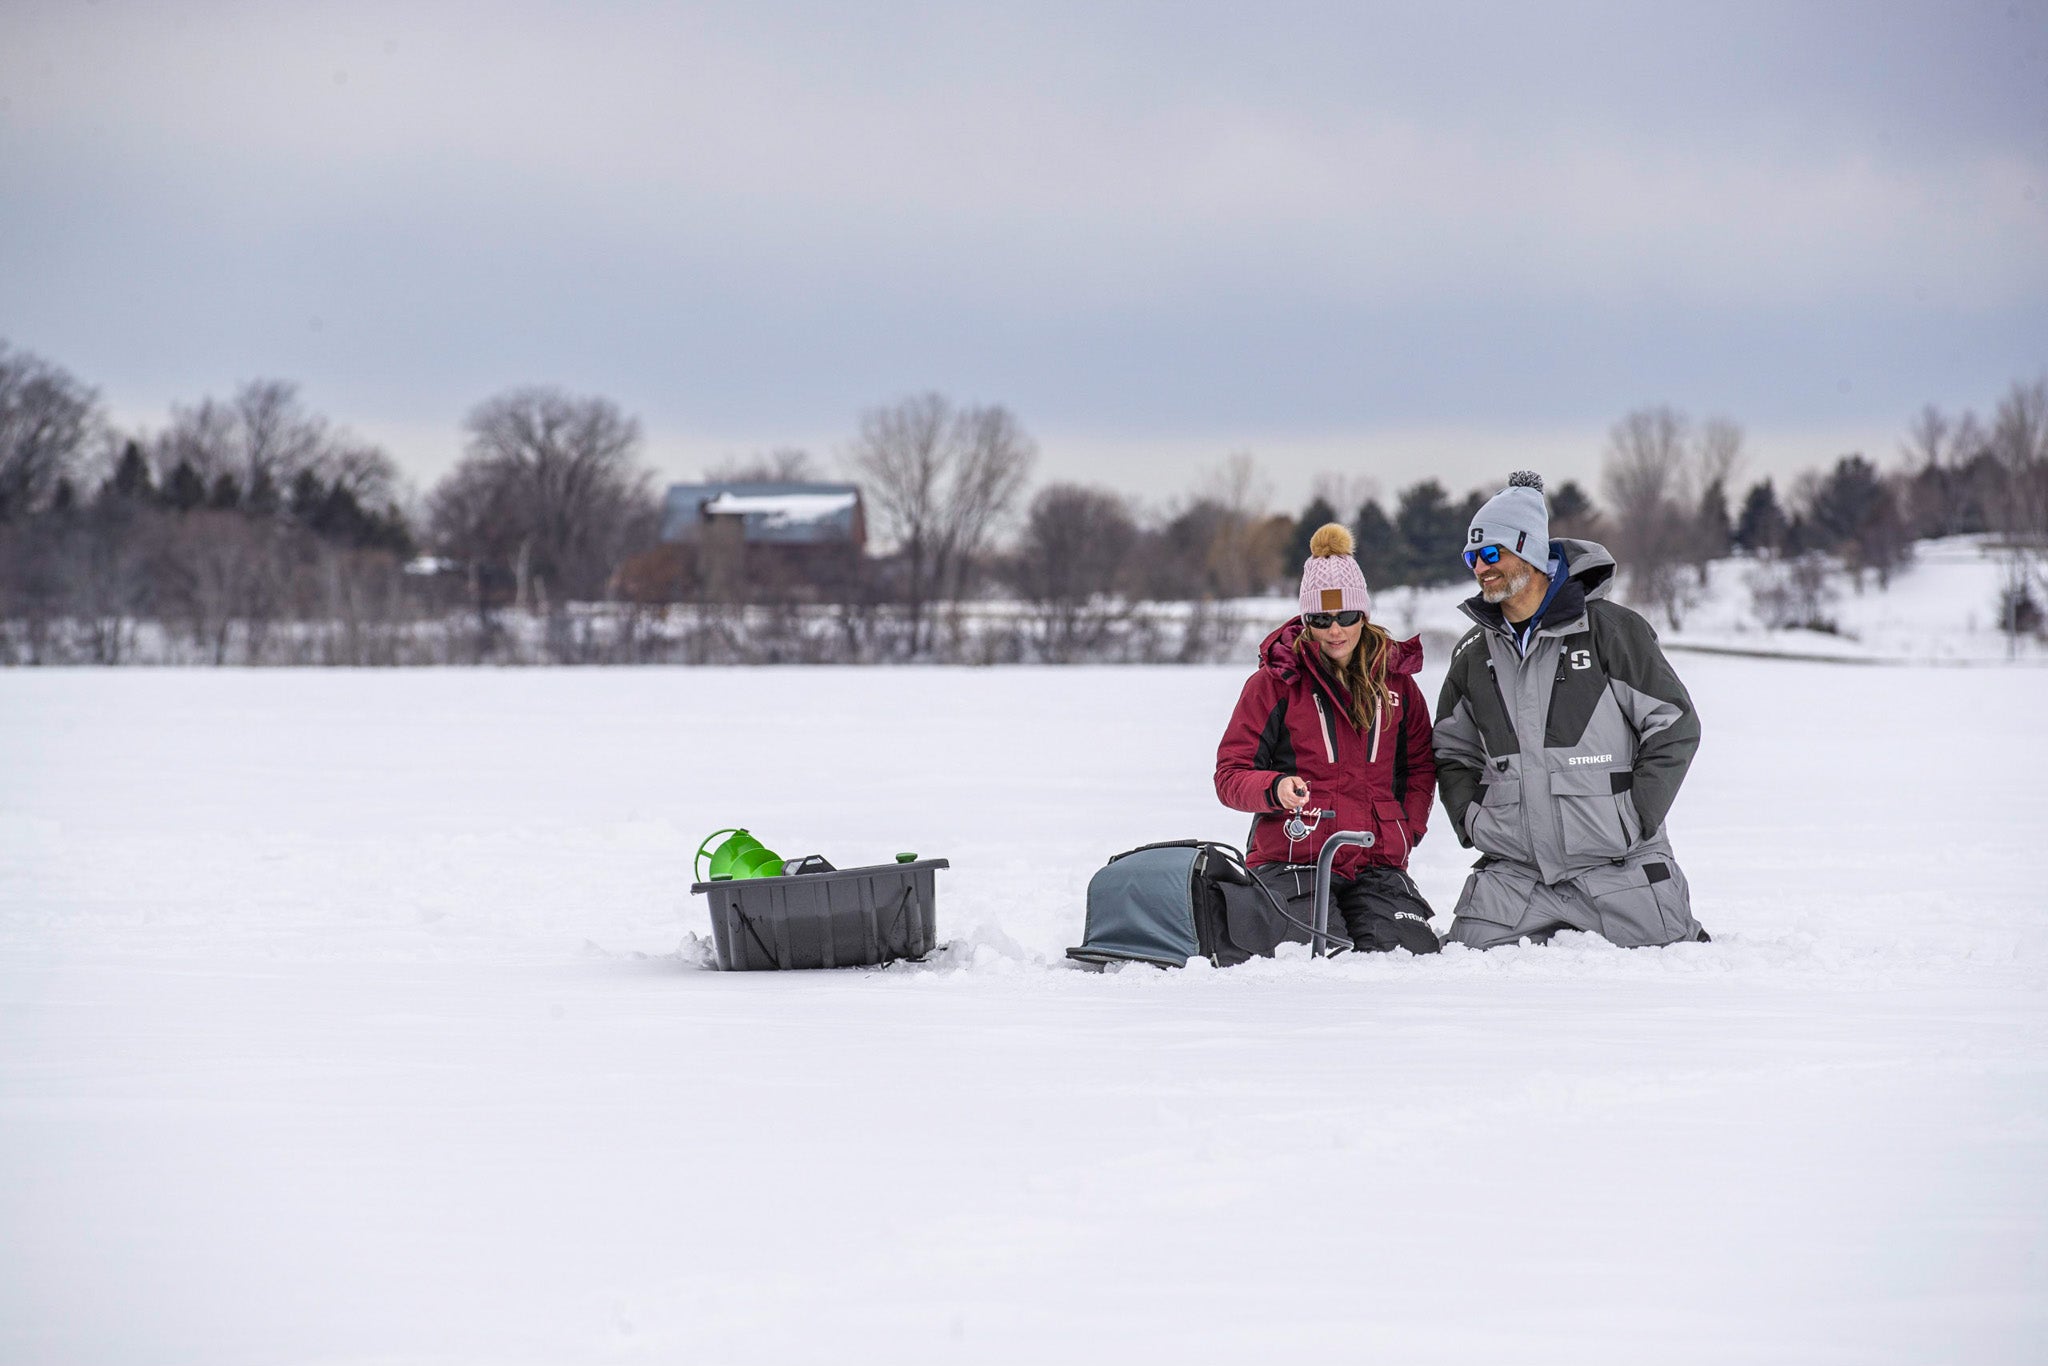 Ice Fishing Suits - Shop Jackets and Bibs